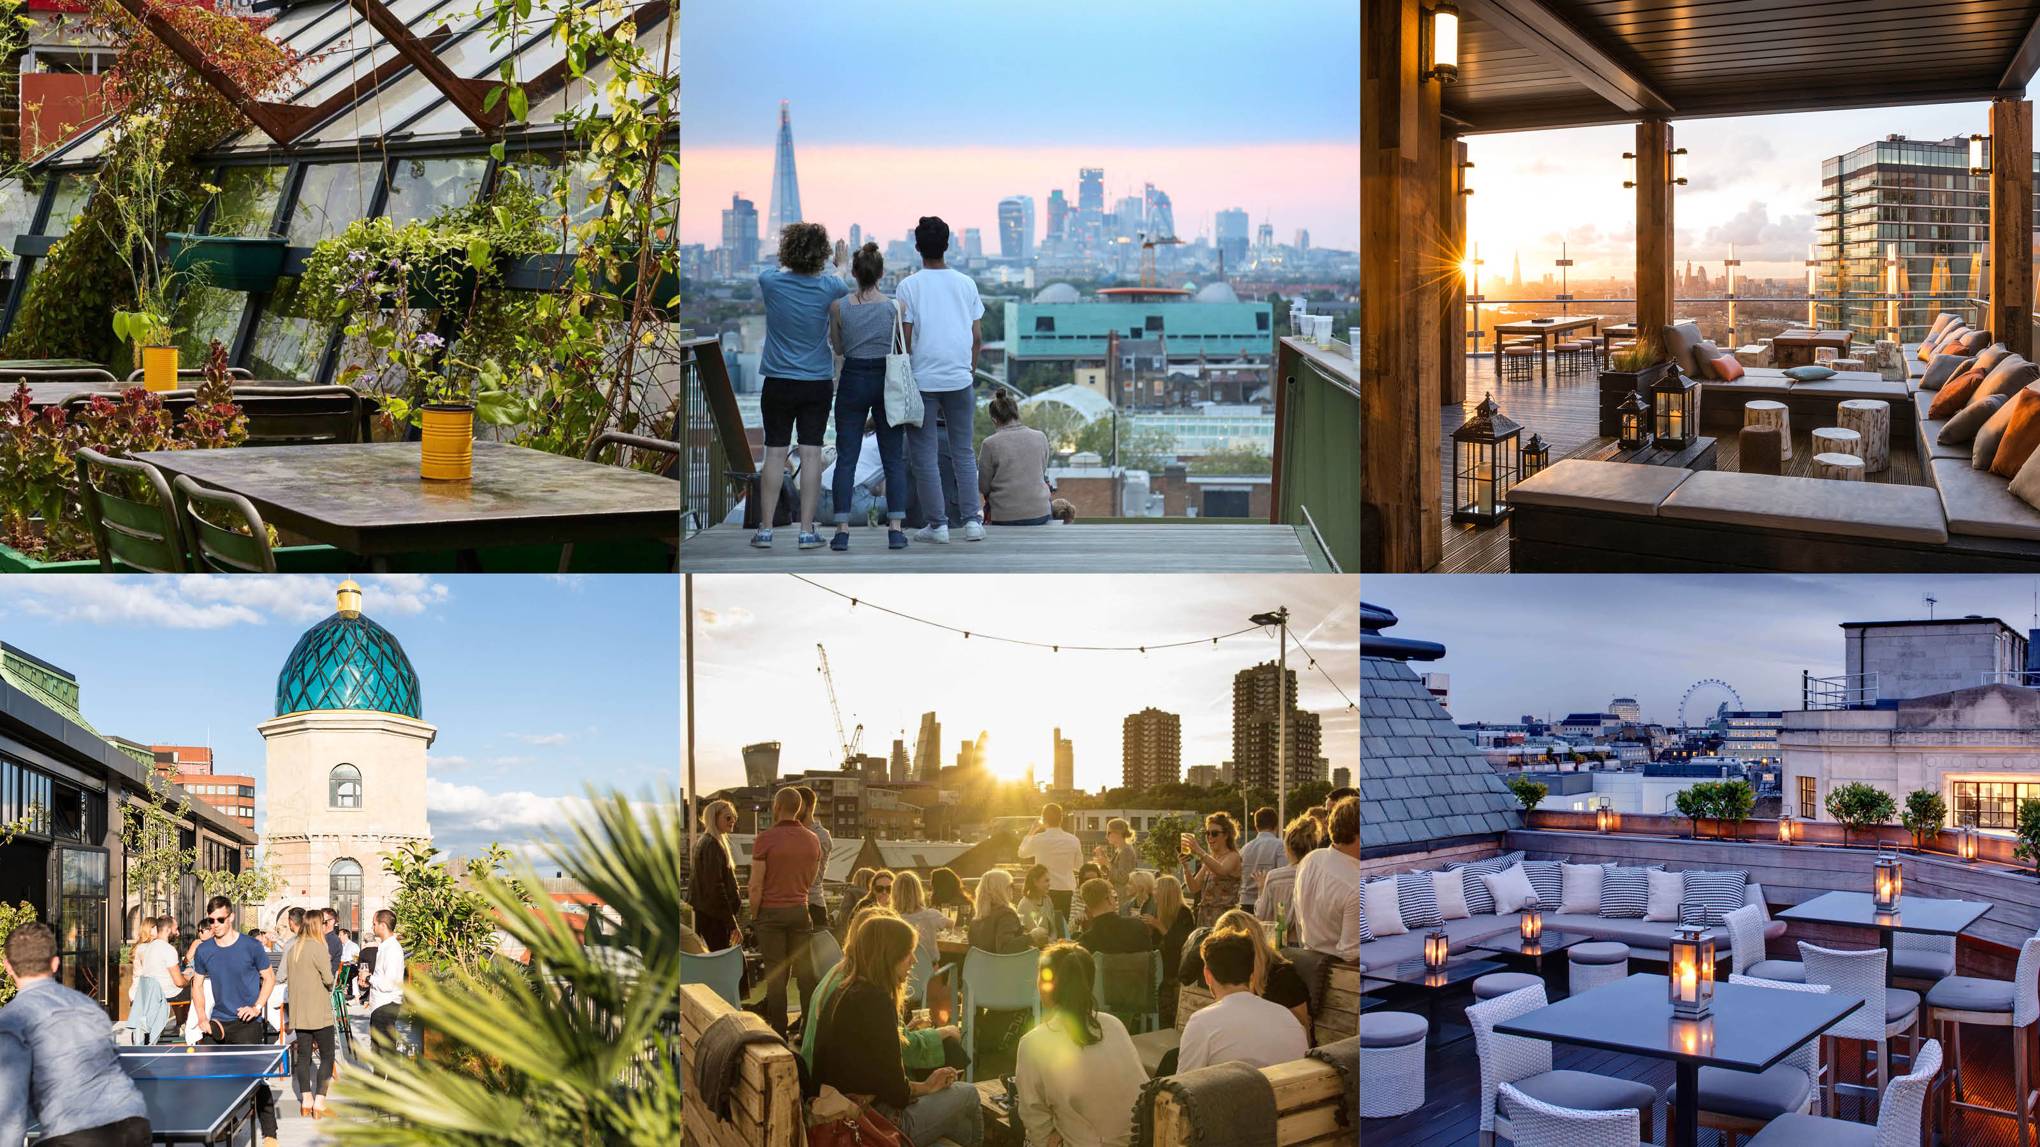 55 HQ Photos Best Roof Top Bars London : Vodka With A View The Best Rooftop Bars In London London Perfect